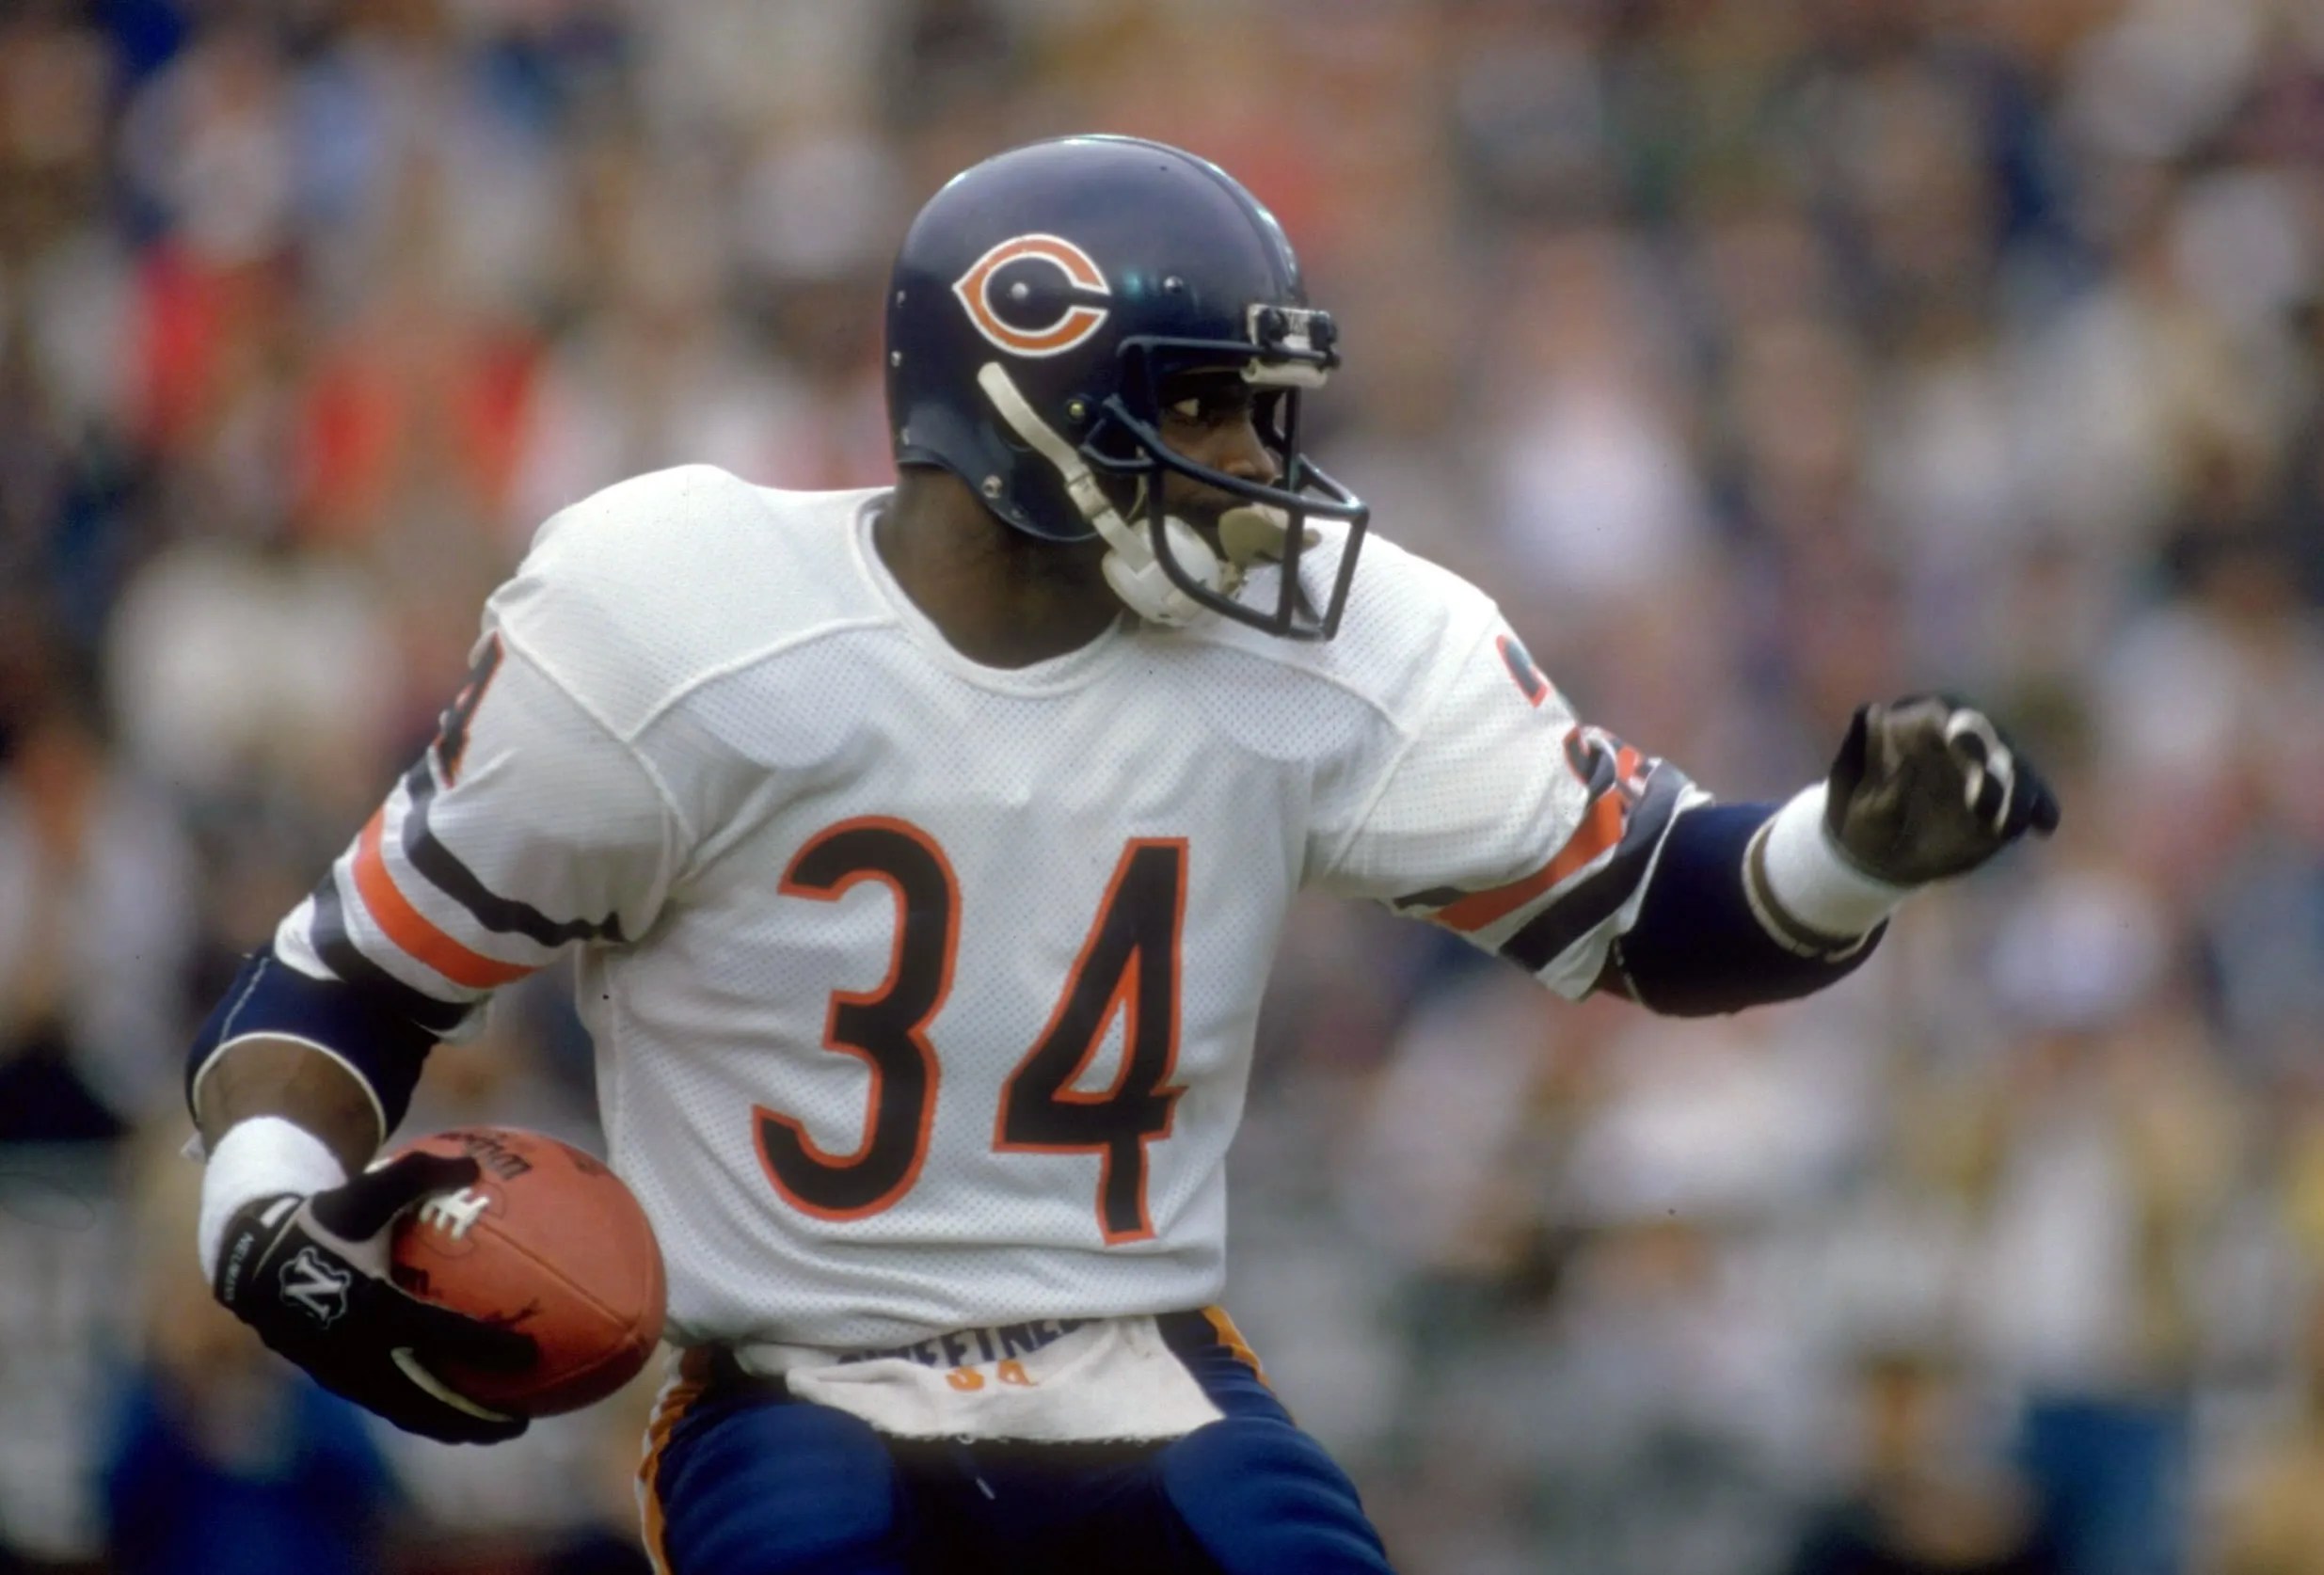 Walter Payton Remembering Bears legend 20 years after his death